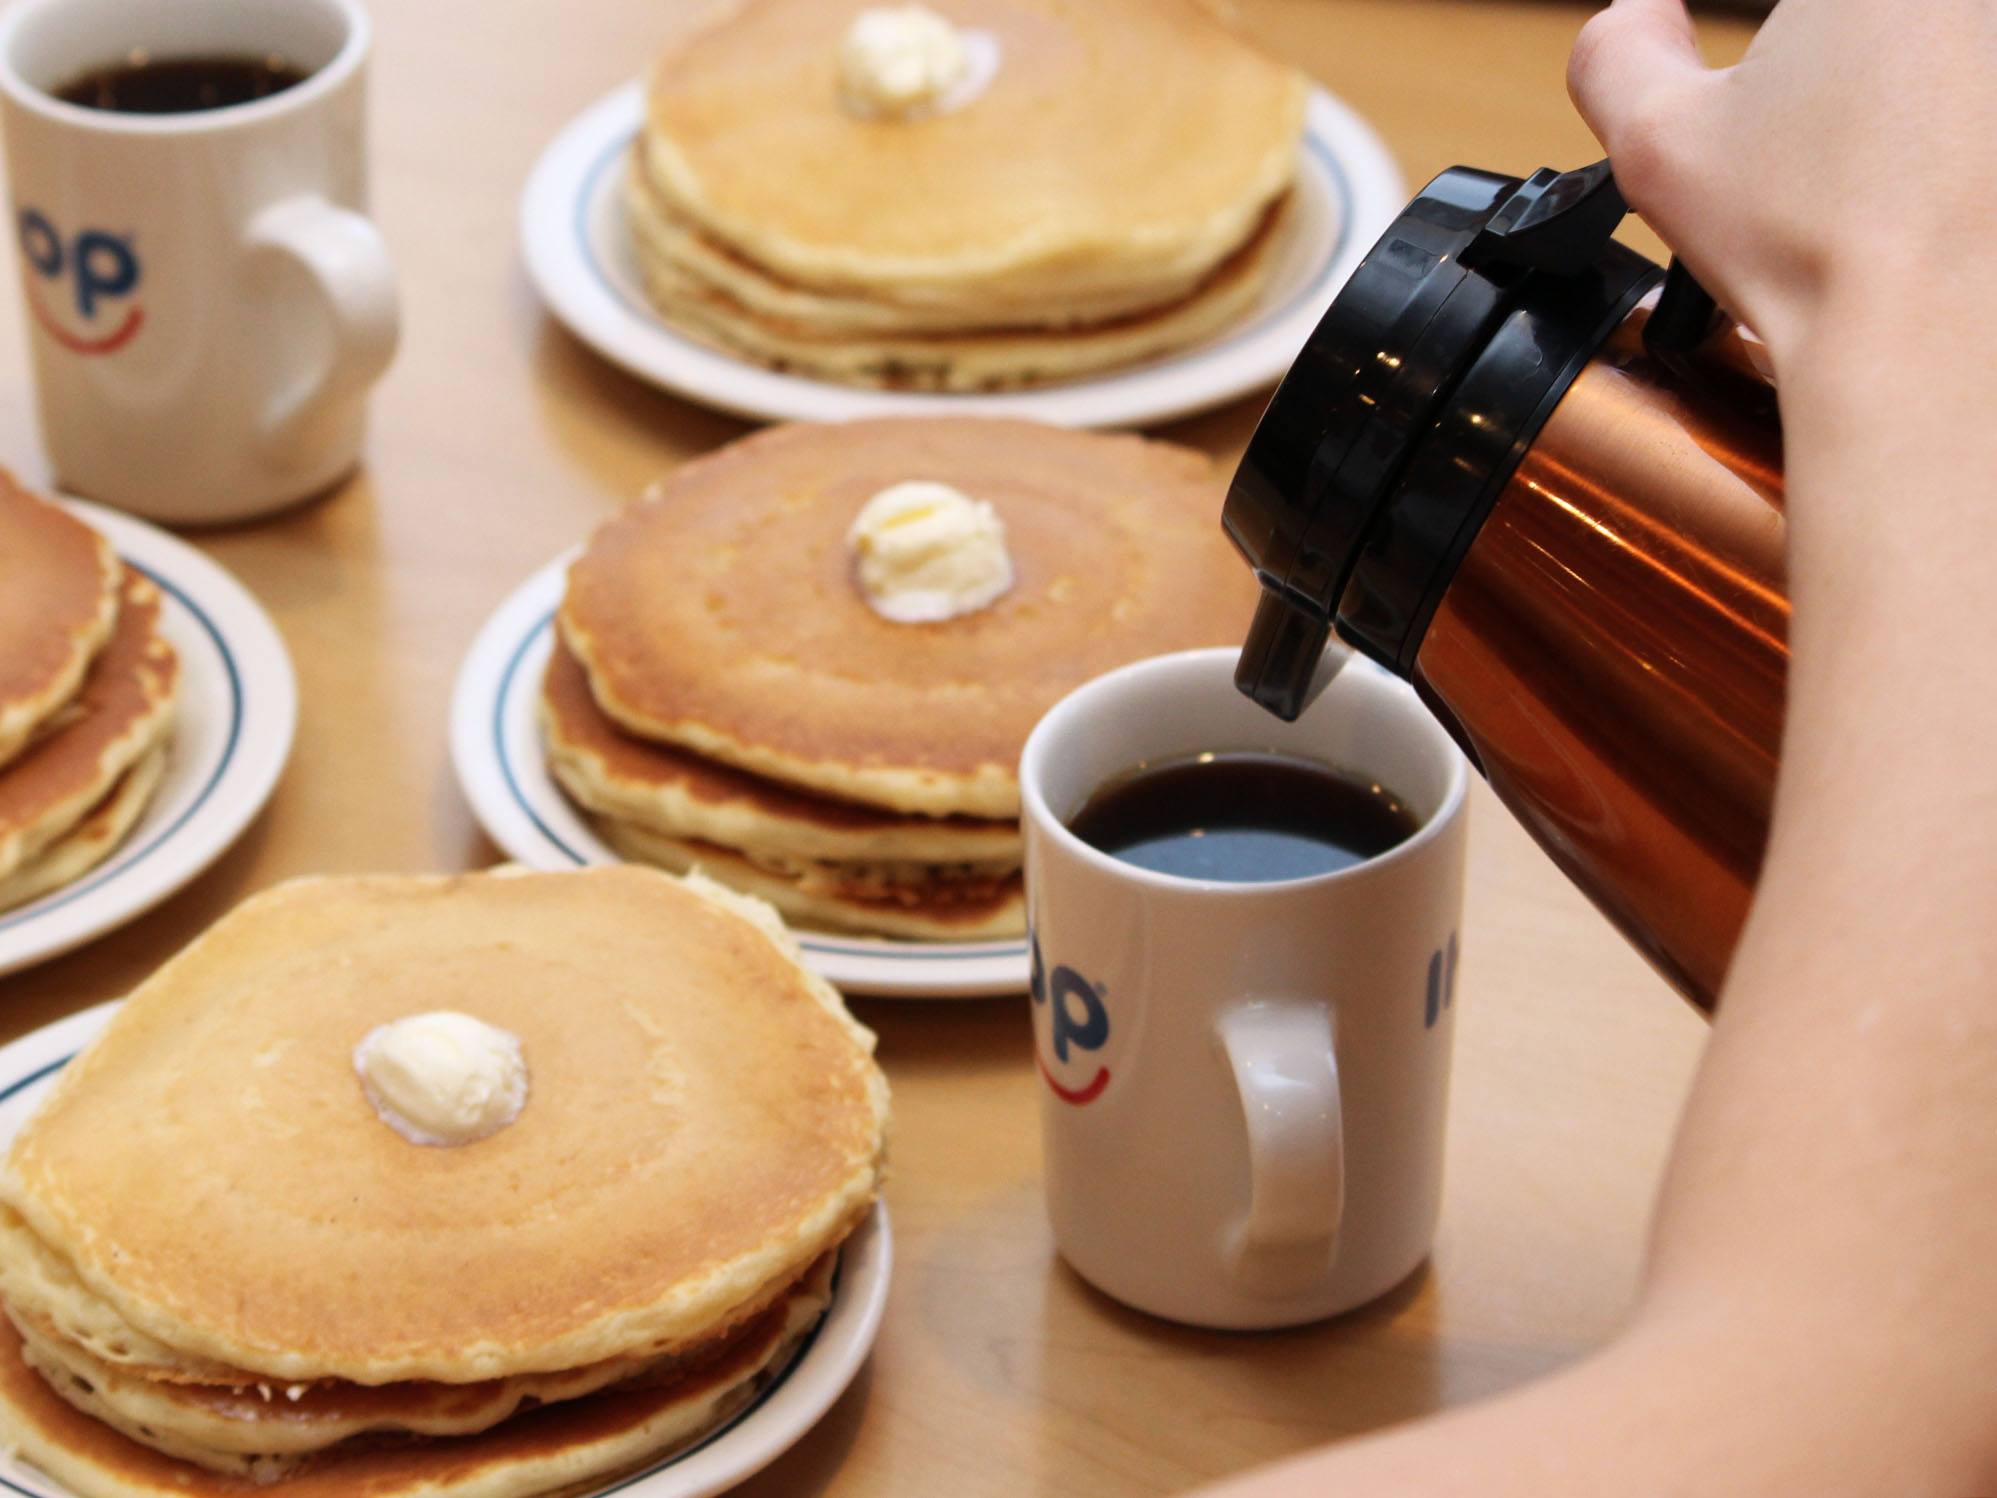 Get FREE Pancakes at IHOP For National Pancake Day On Feb 25th